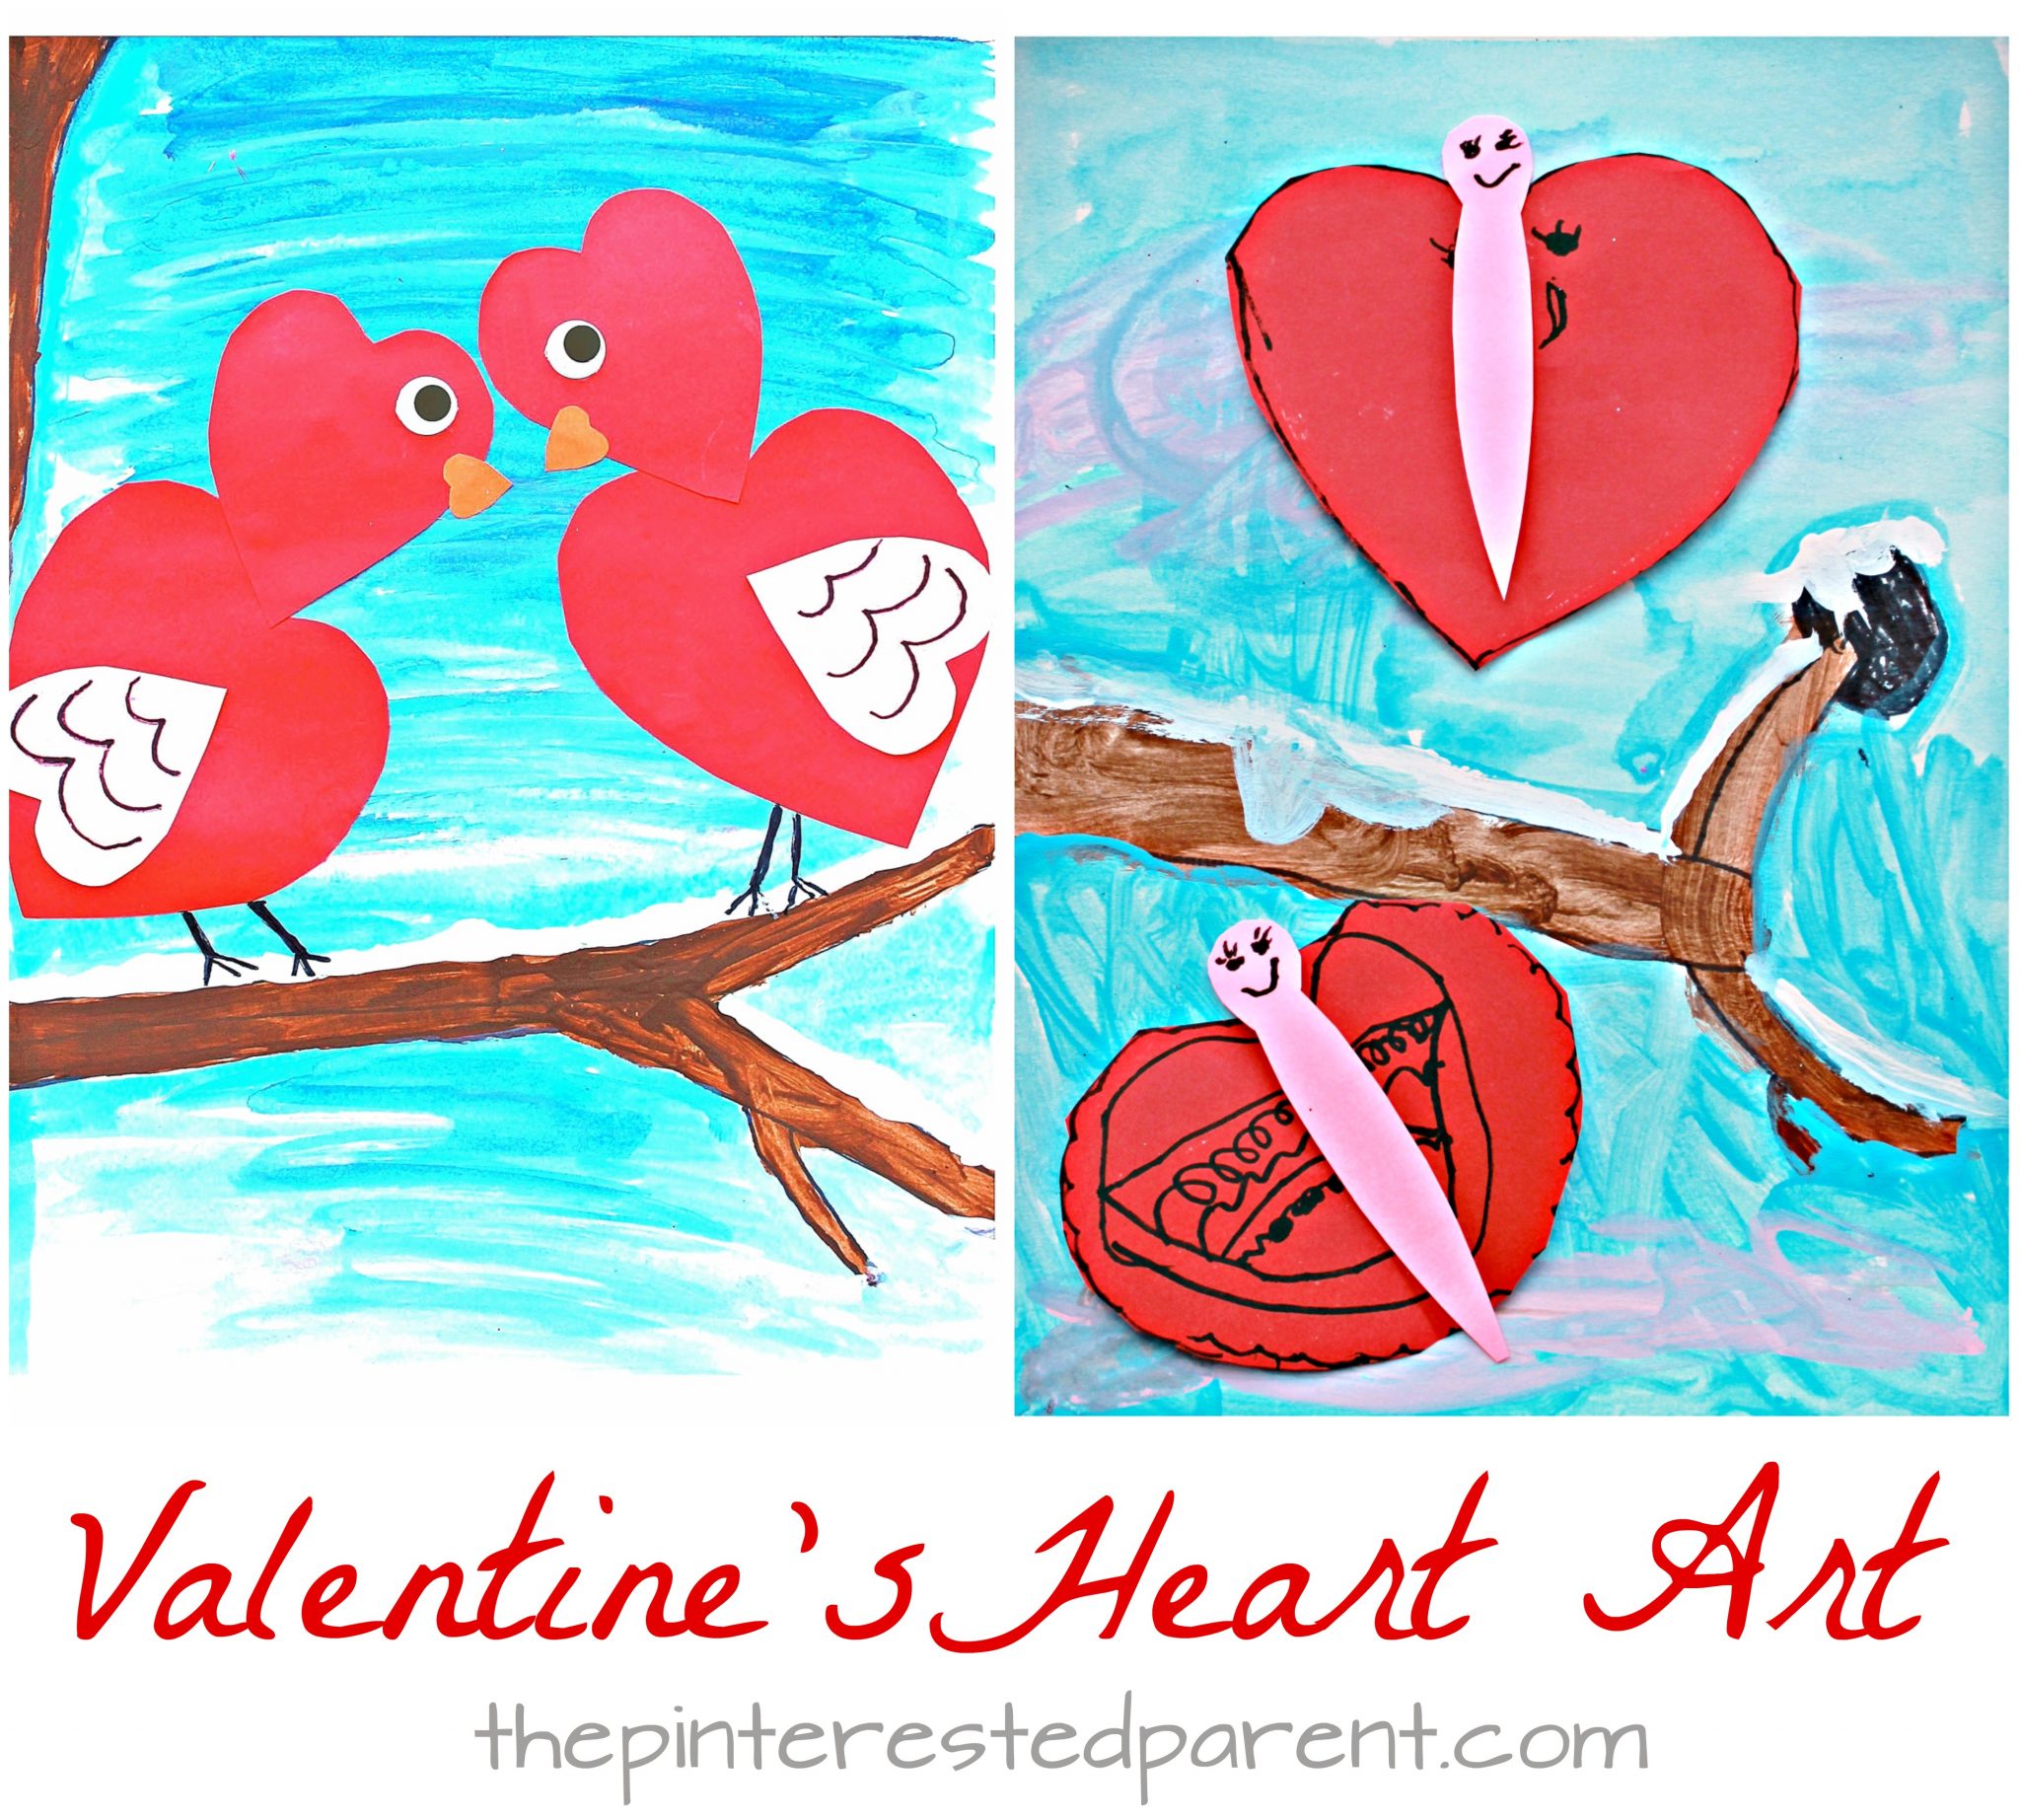 Mixed media heart shaped love butterflies and birds for Valentine's Day. Watercolor, acrylic paint and construction paper and markers. Arts and crafts for kids